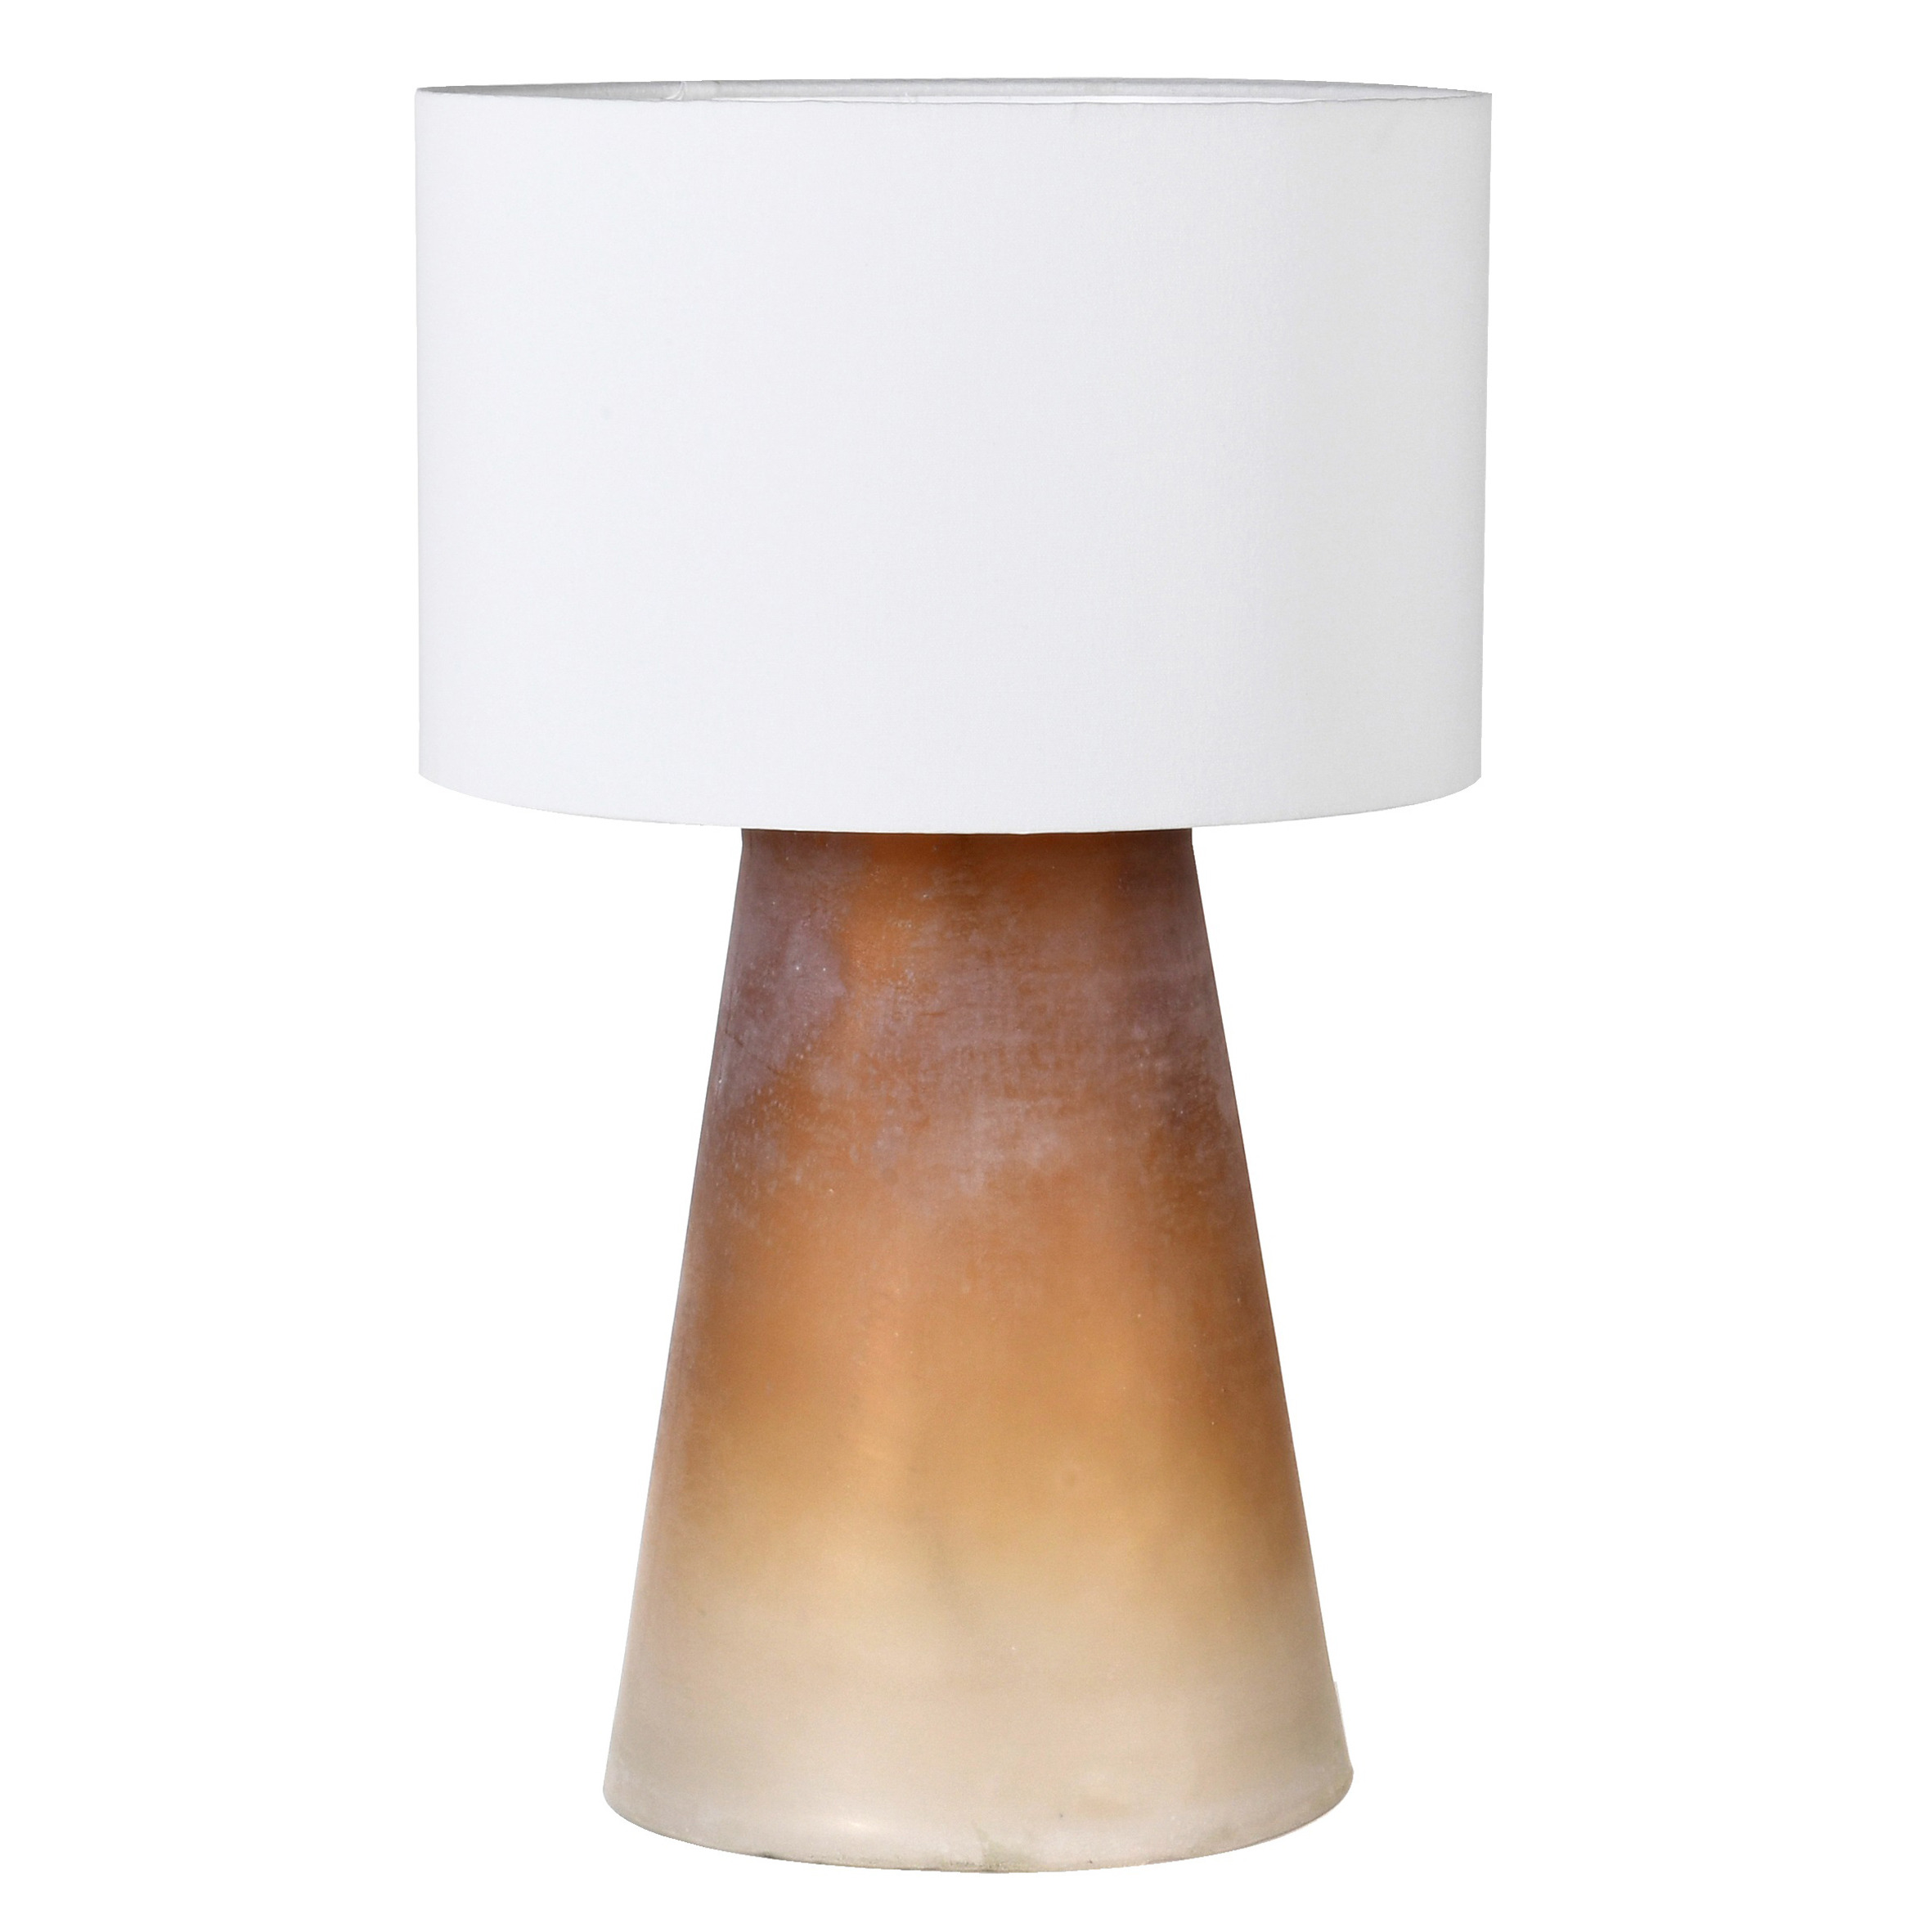 Rust Ombre Table Lamp, Orange Metal - Barker & Stonehouse - image 1